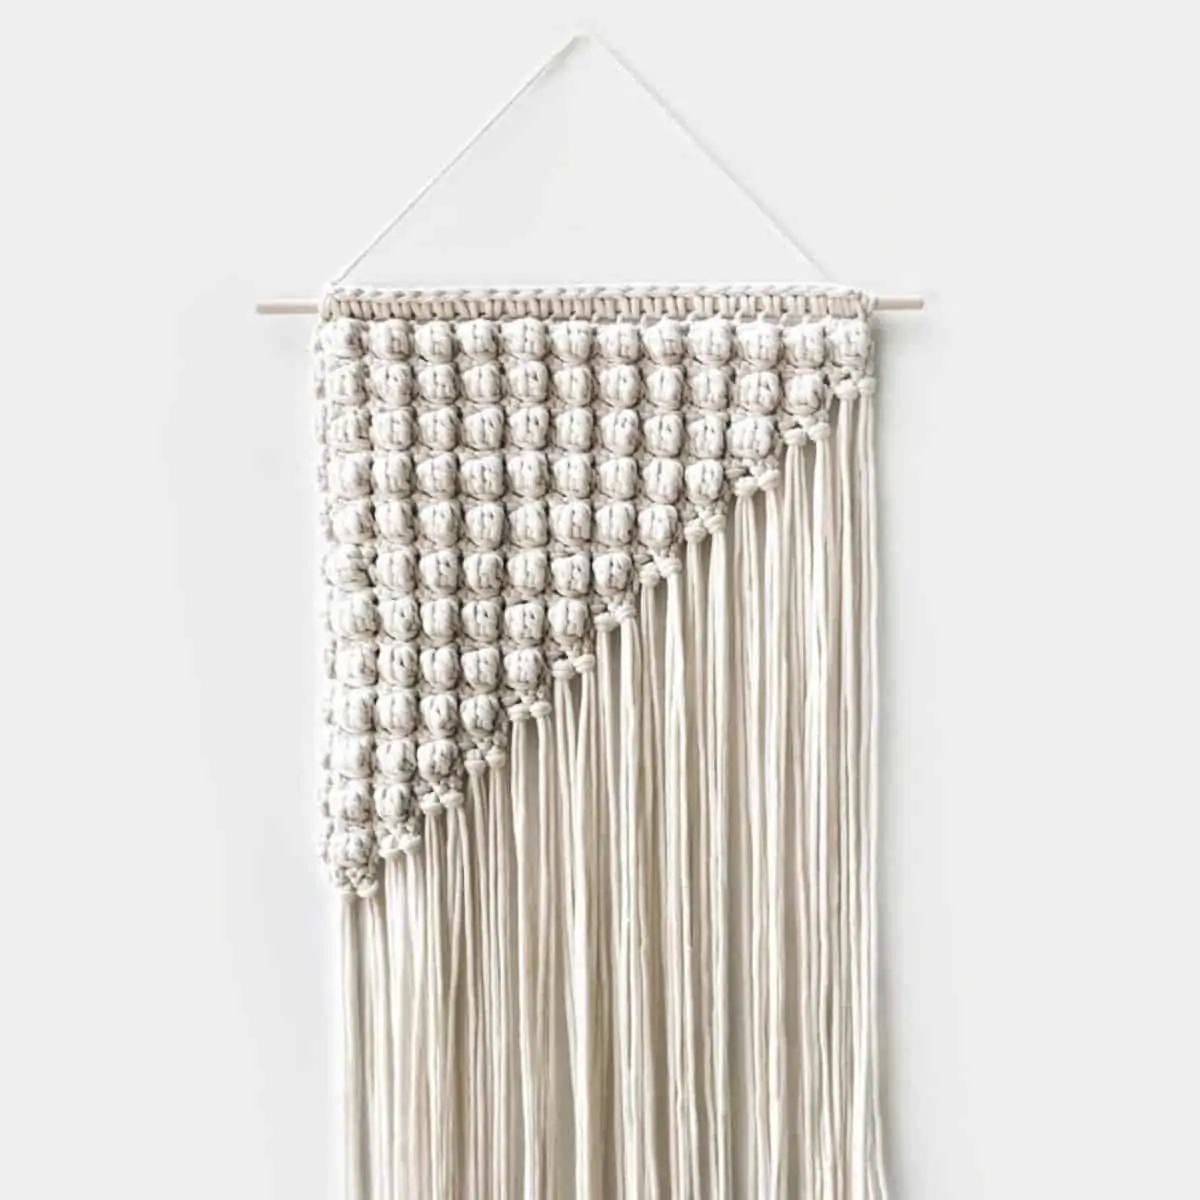 triangular crochet wall hanging made with bobbles and long fringe